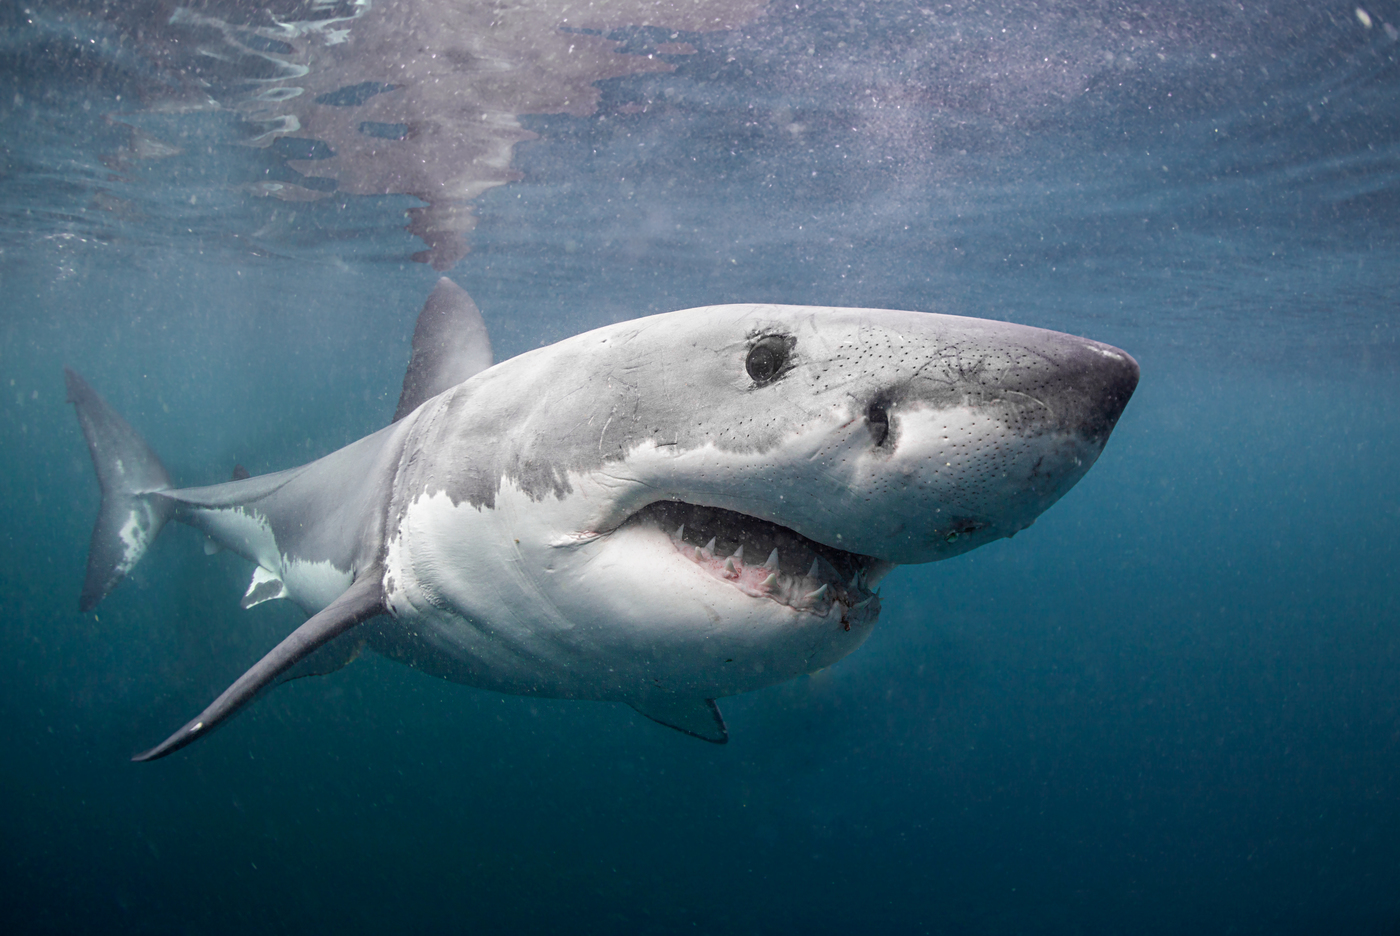 The great white shark or man-eater shark is one of the largest predatory fish on earth.